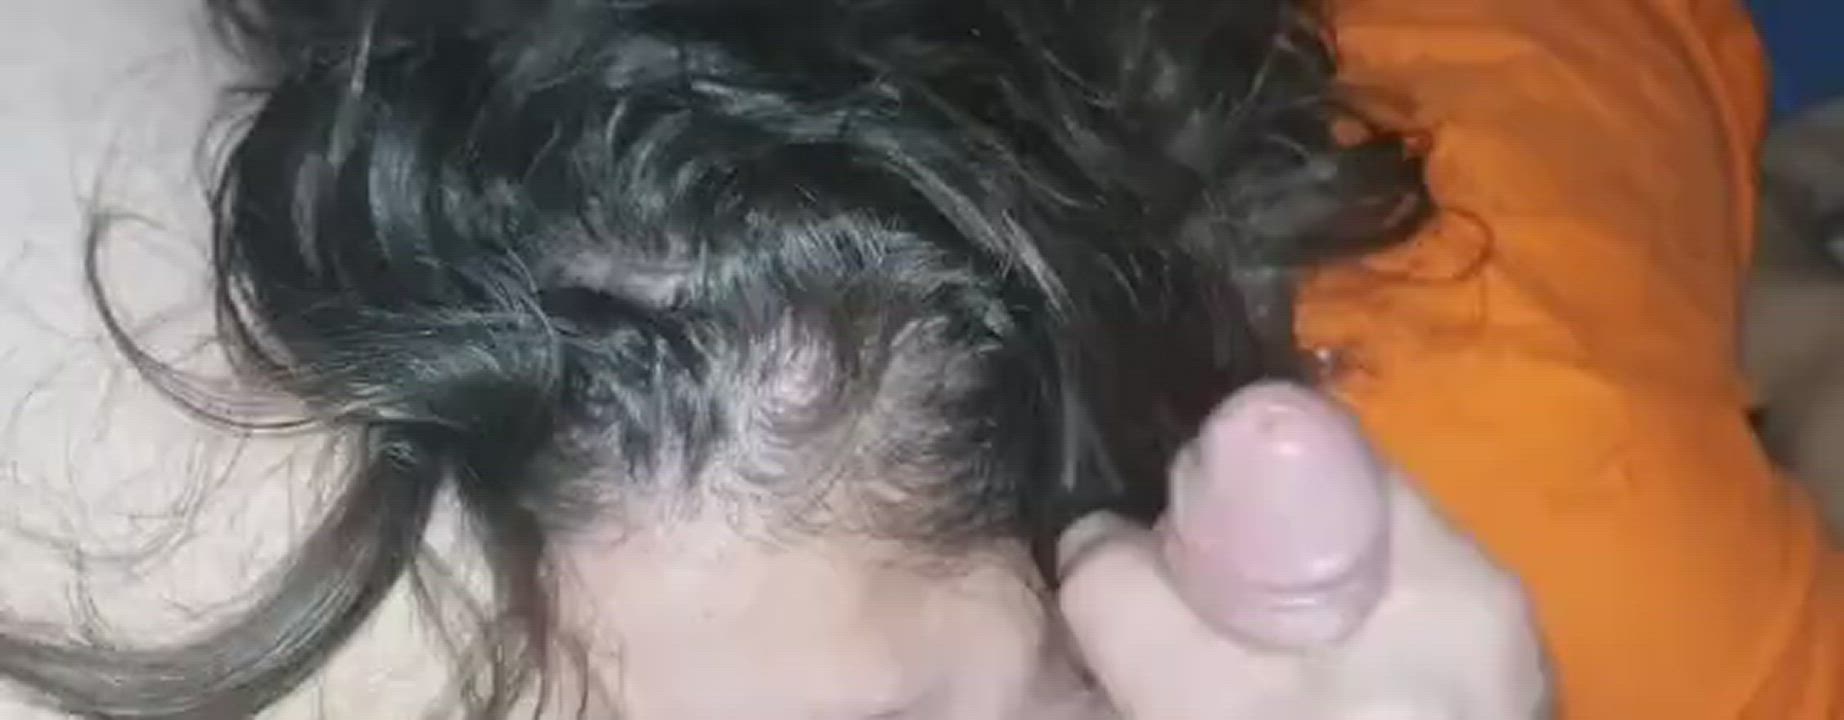 He Cums Right in Her Hair